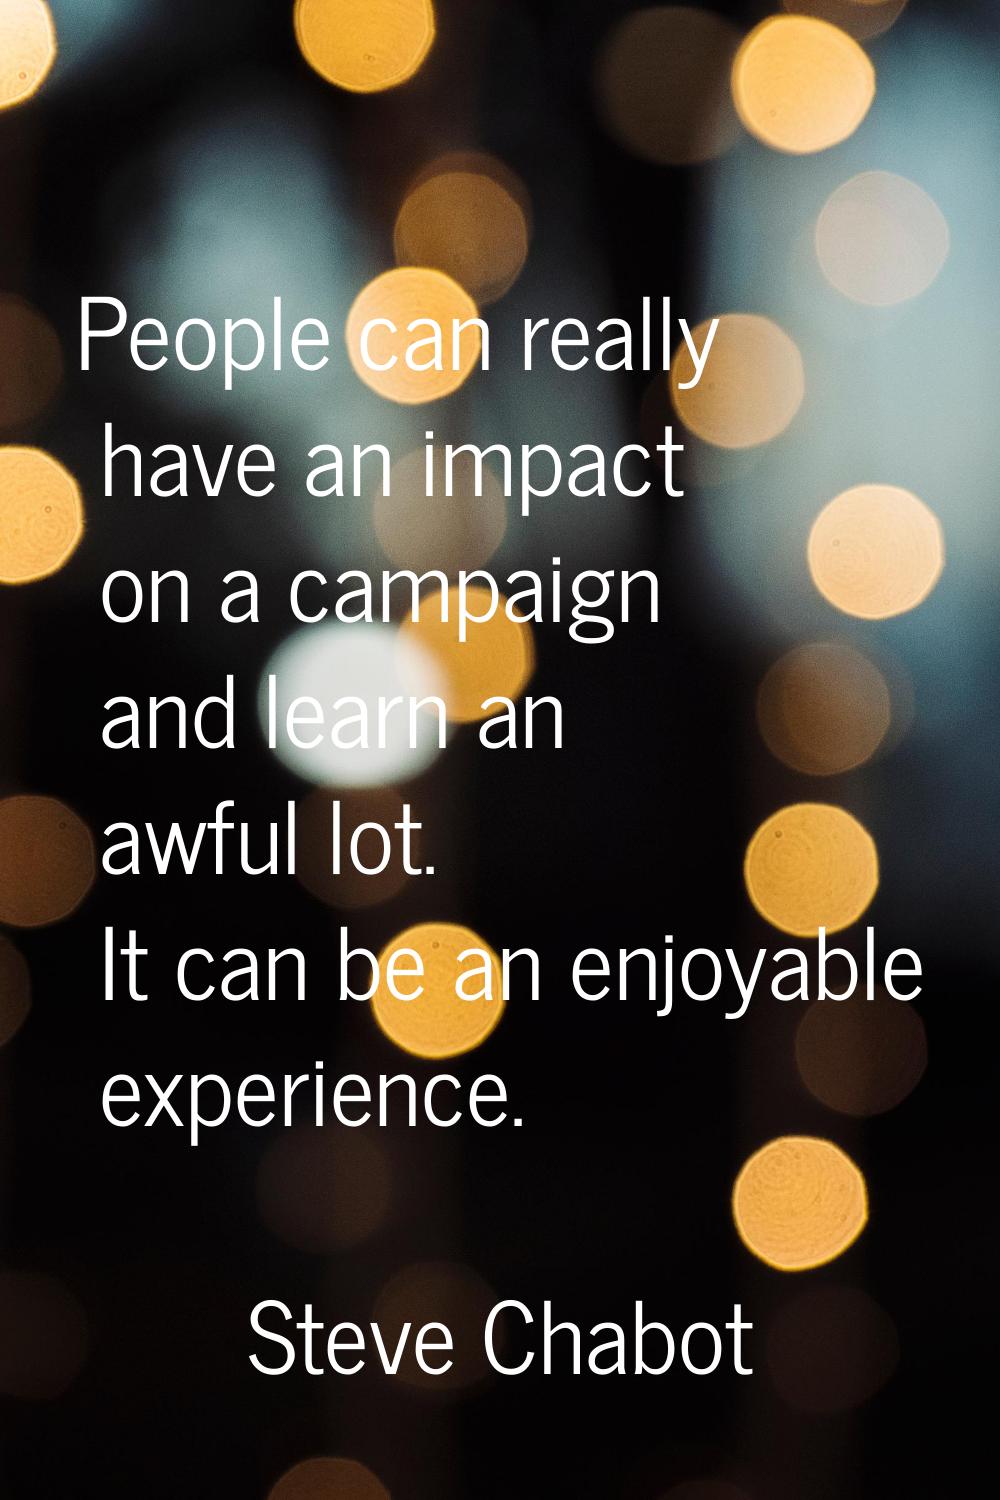 People can really have an impact on a campaign and learn an awful lot. It can be an enjoyable exper